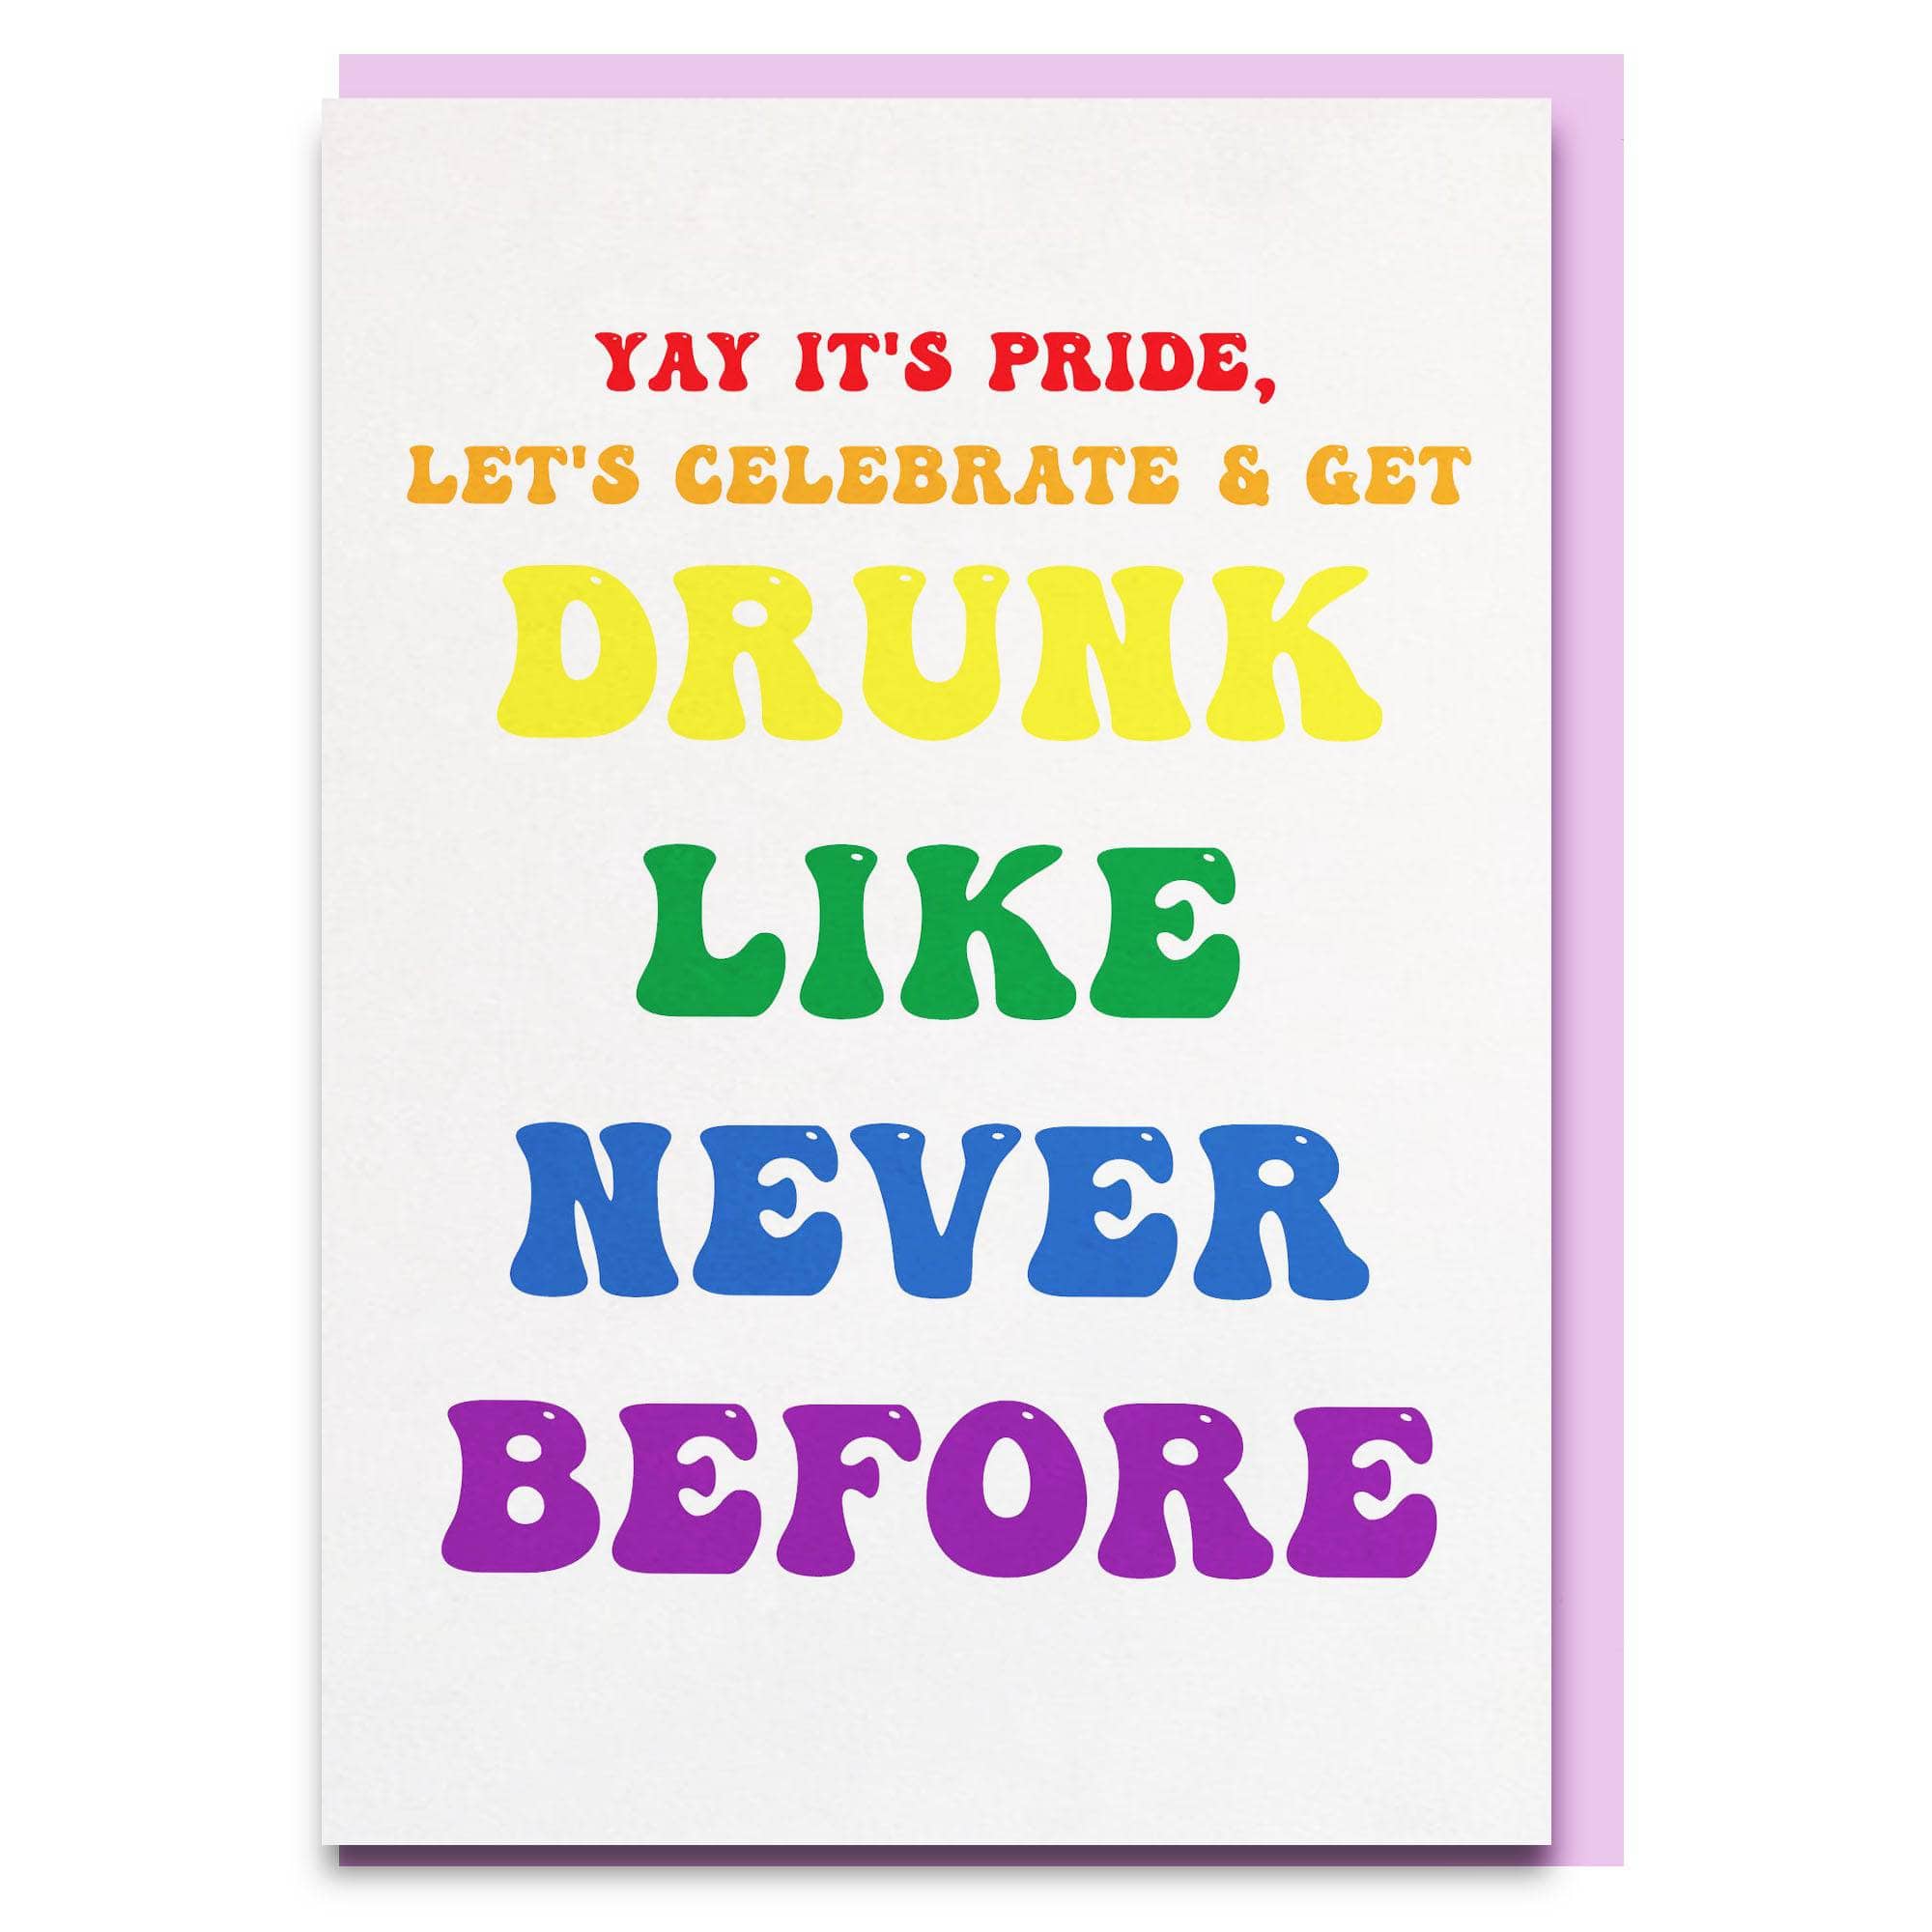 Sweet and funny pride card.